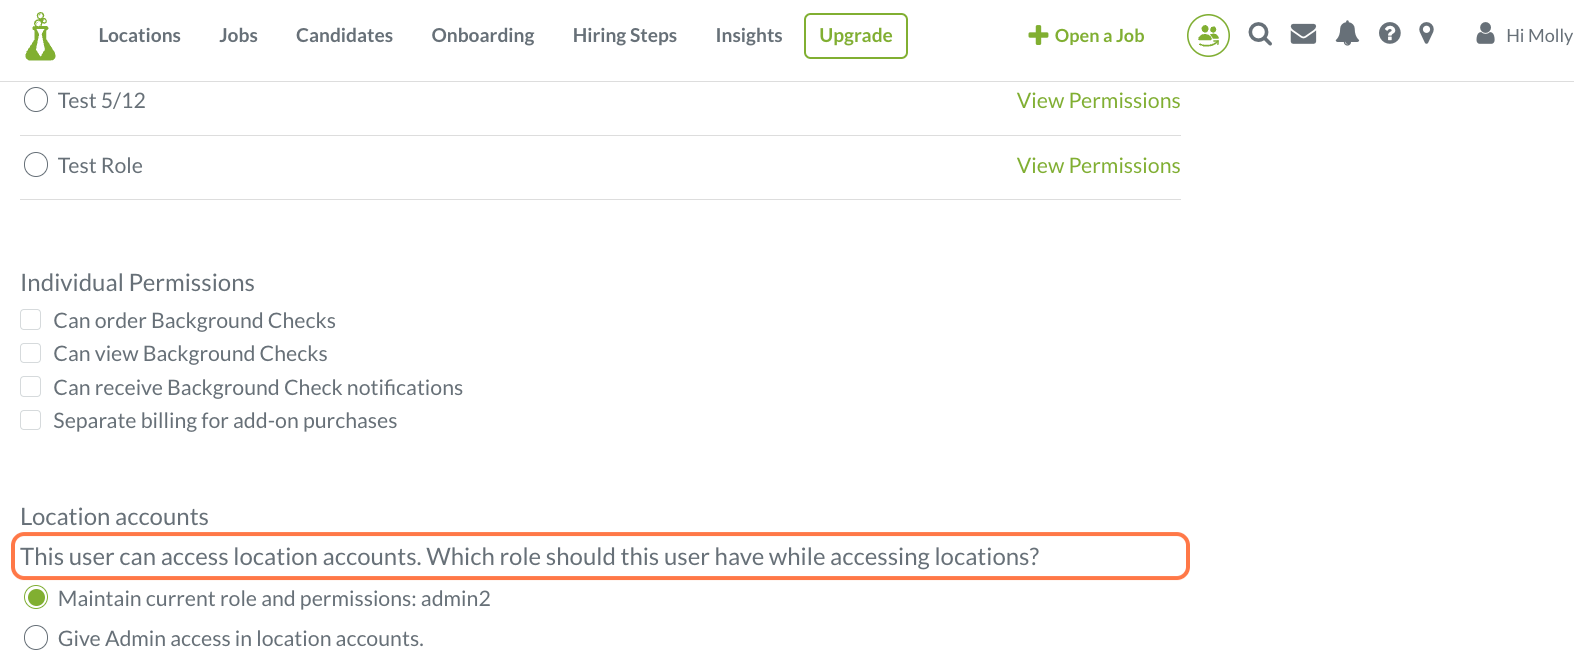 Click on This user can access location accounts. Which role should this user have while accessing locations?